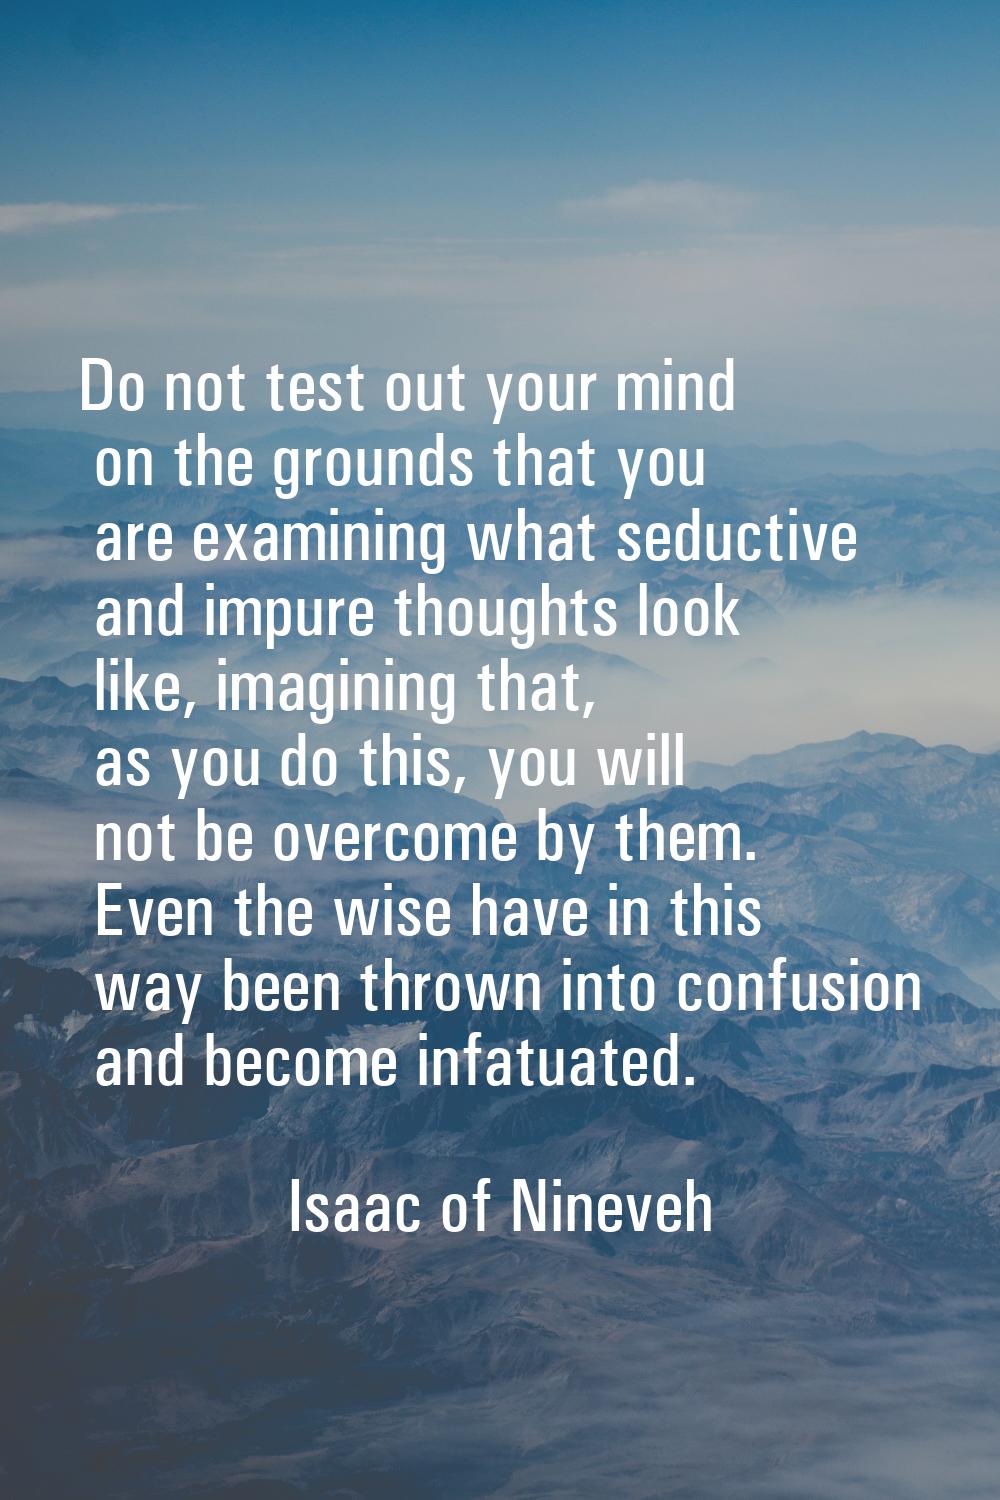 Do not test out your mind on the grounds that you are examining what seductive and impure thoughts 